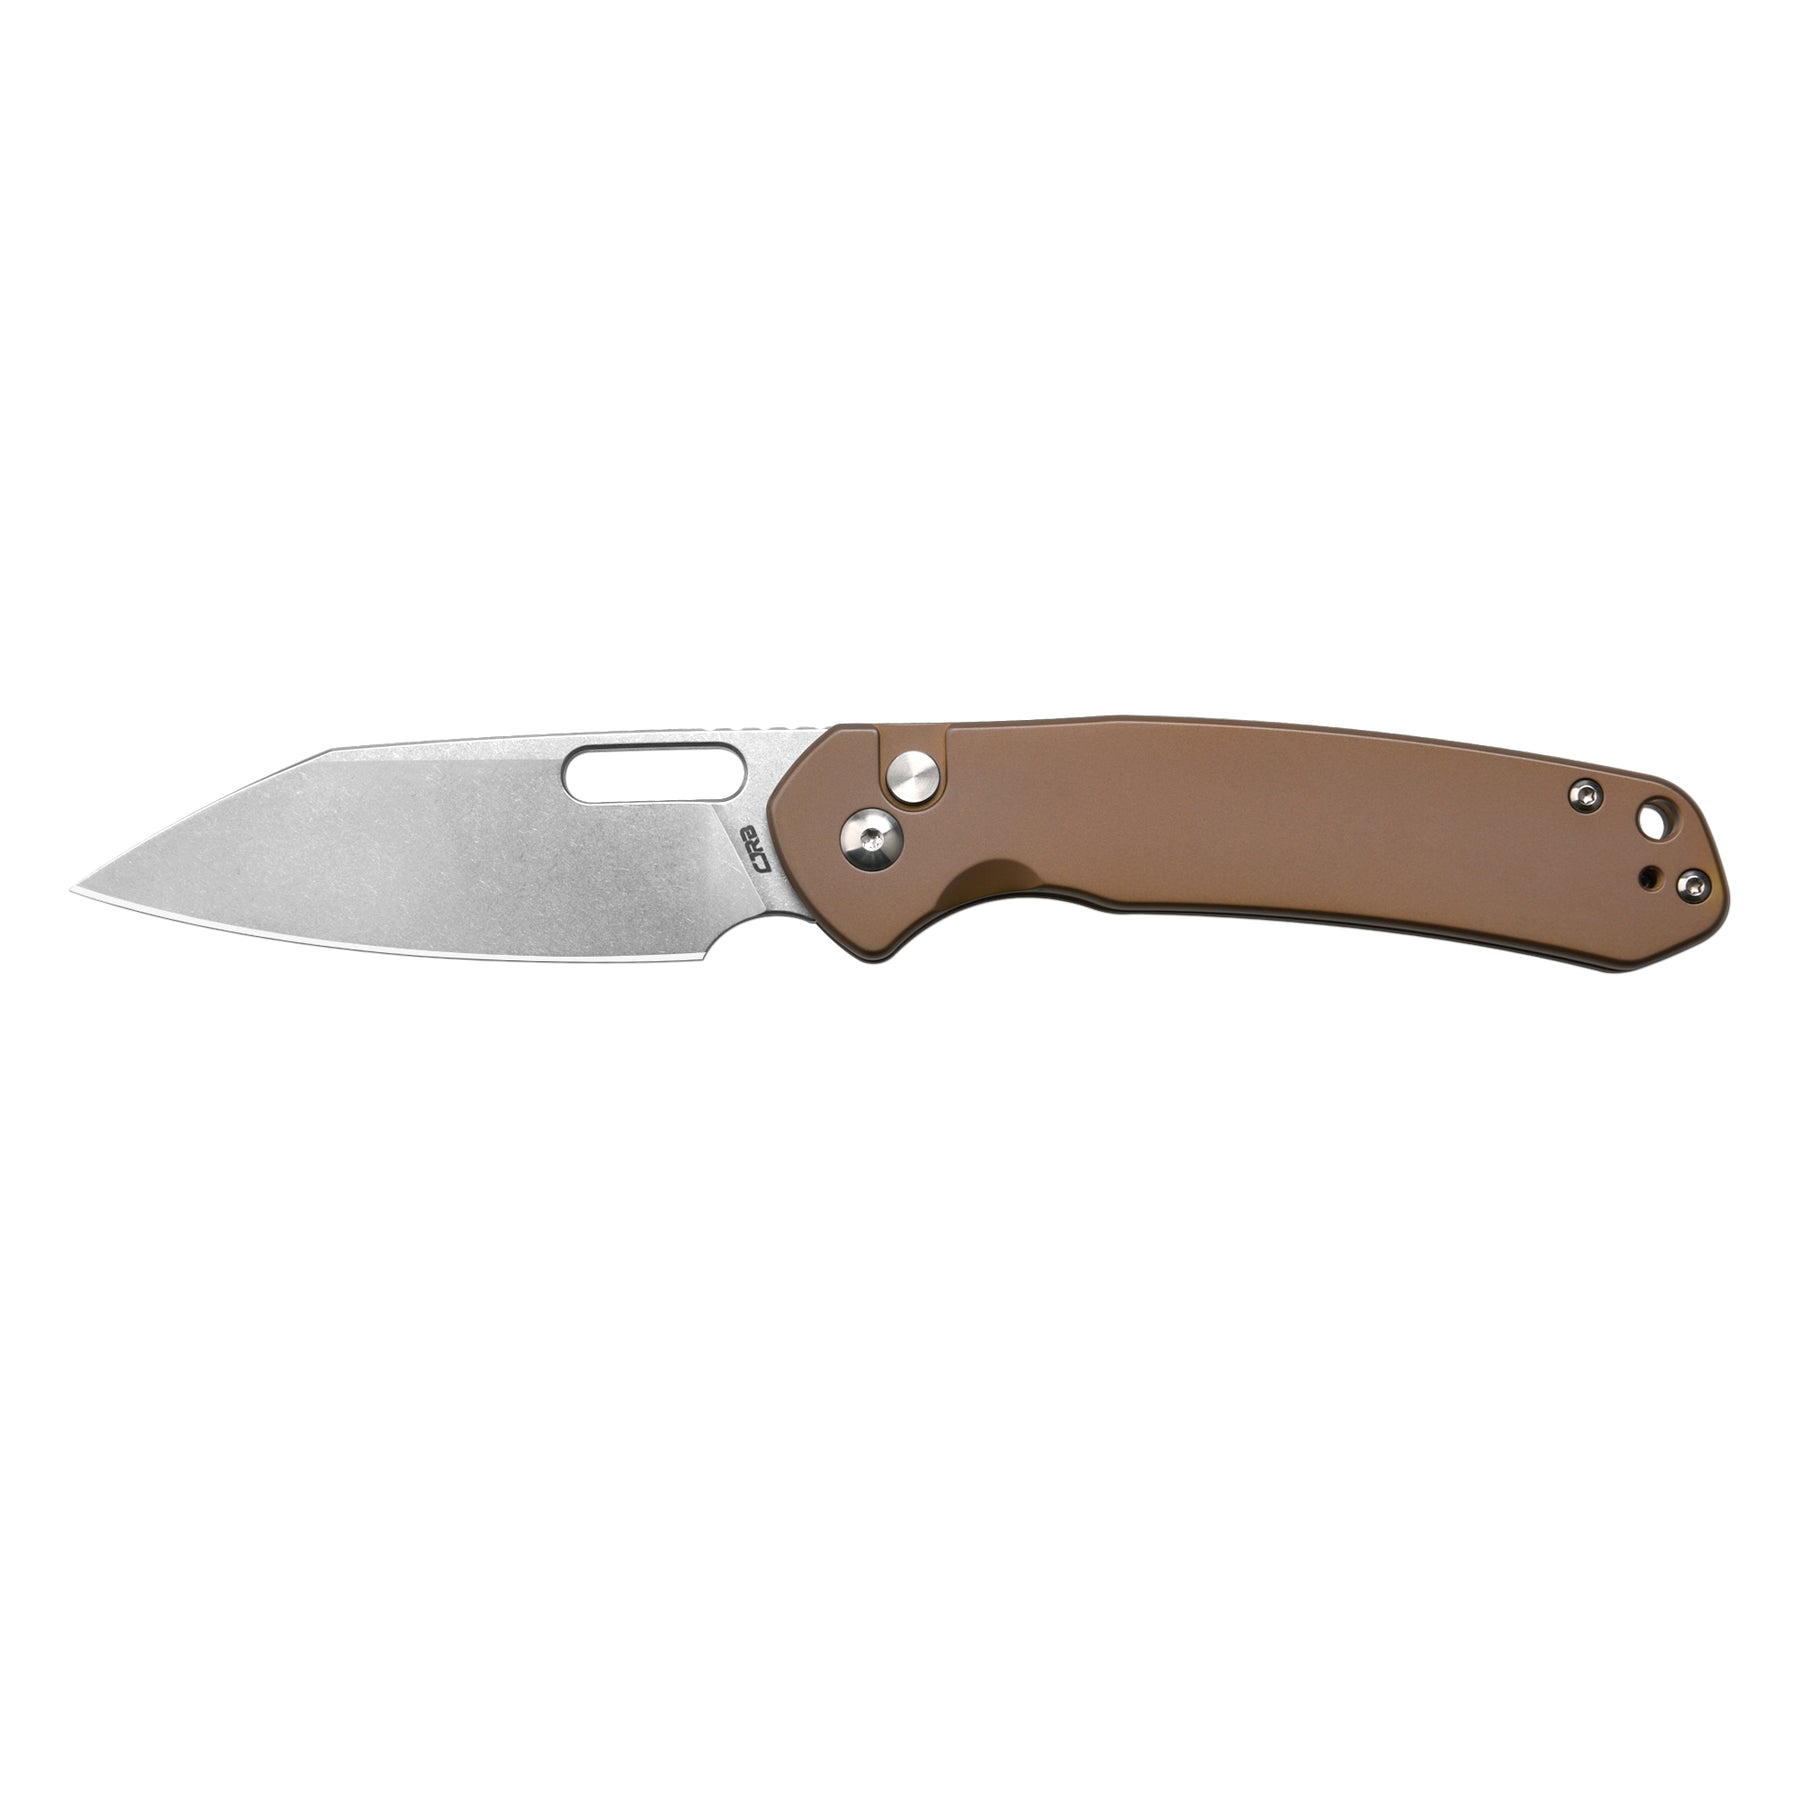 CJRB PYRITE WHARNCLIFFE J1925A AR-RPM9 POWDER STEEL BLADE STEEL HANDLE FOLDING KNIVES COPPER STEEL COLOR